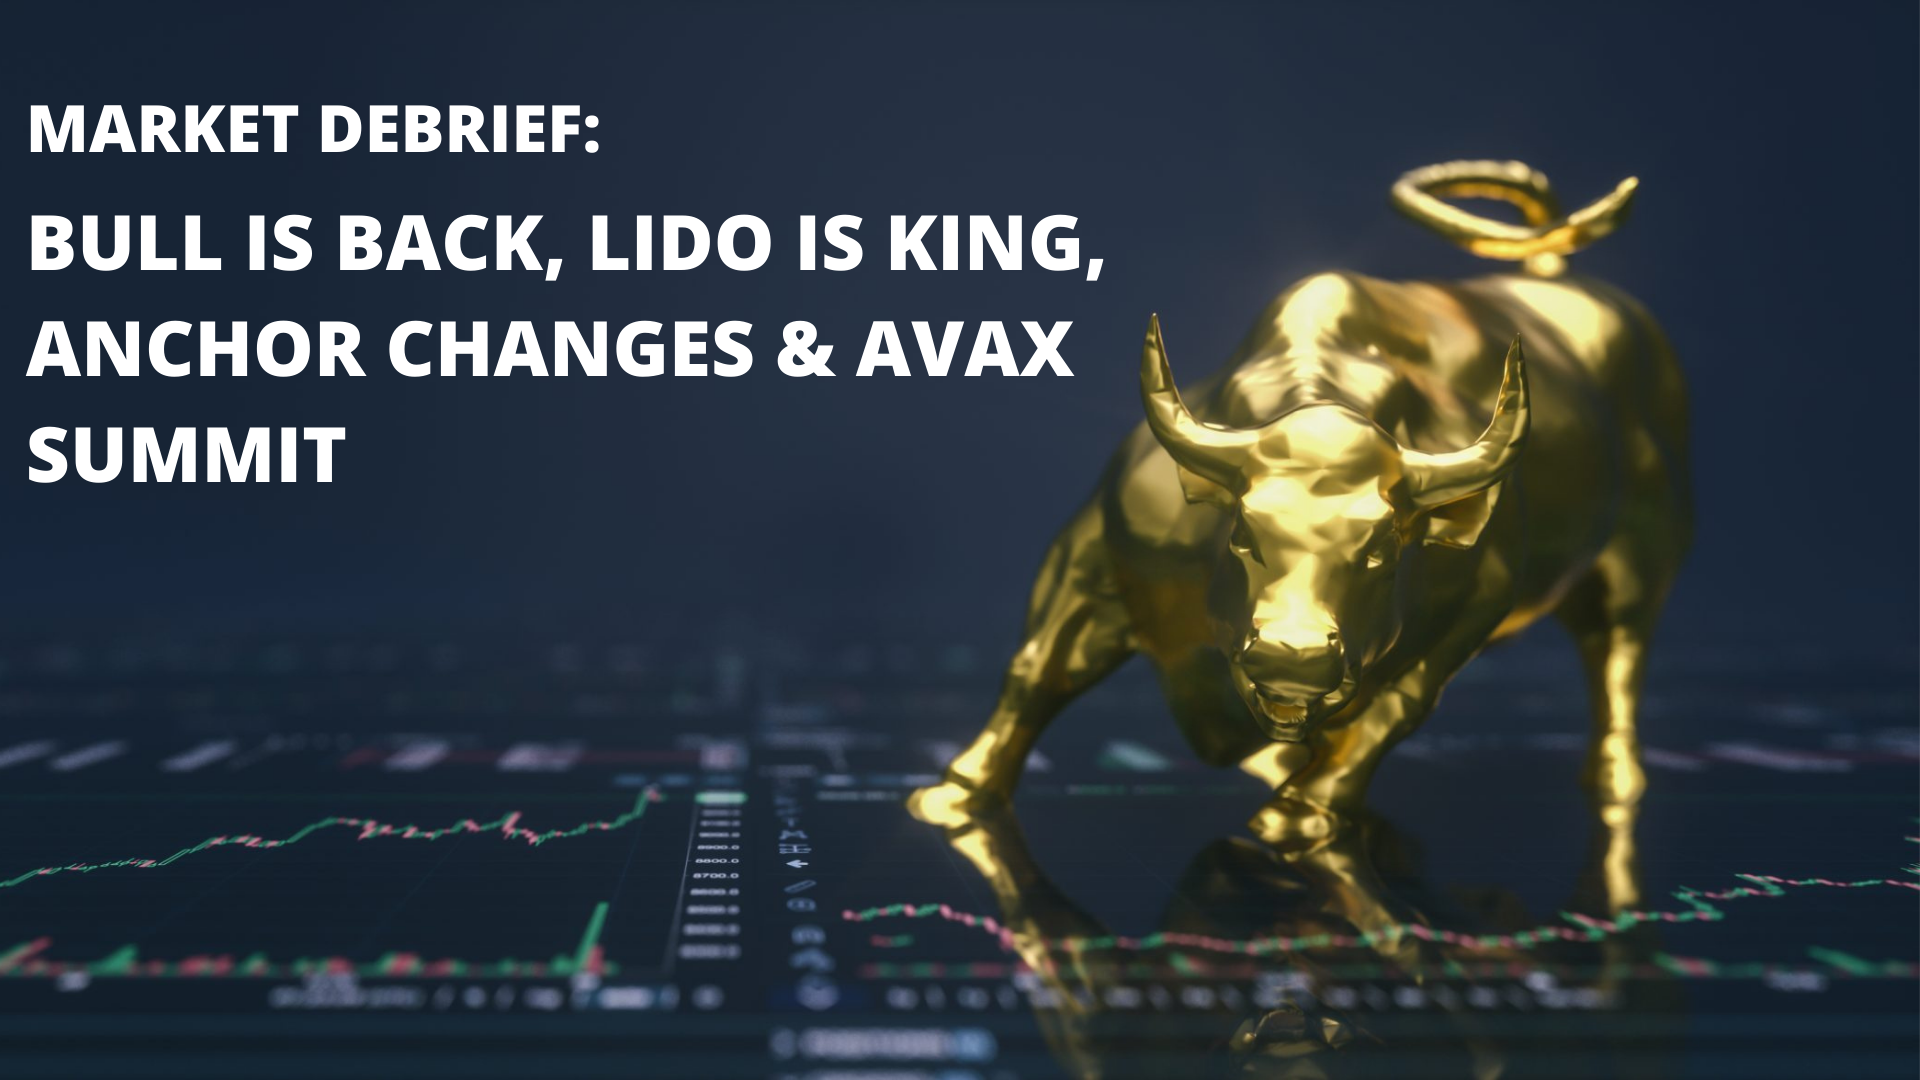 BULL IS BACK, LIDO IS KING, ANCHOR CHANGES & AVAX SUMMIT